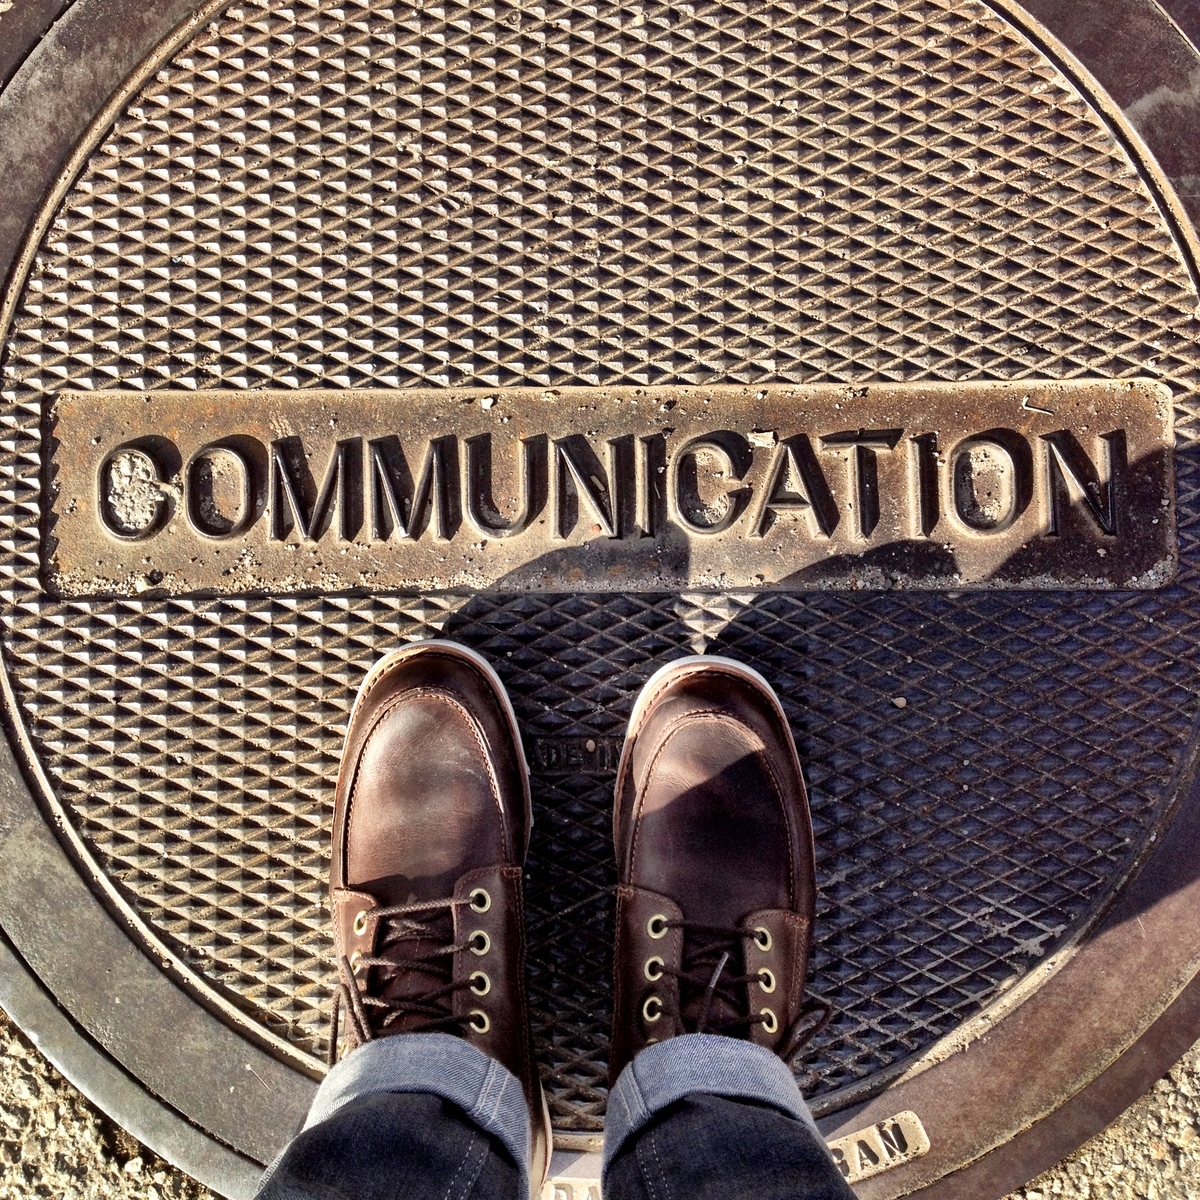 9 Of The Best Communication Tips For Churches